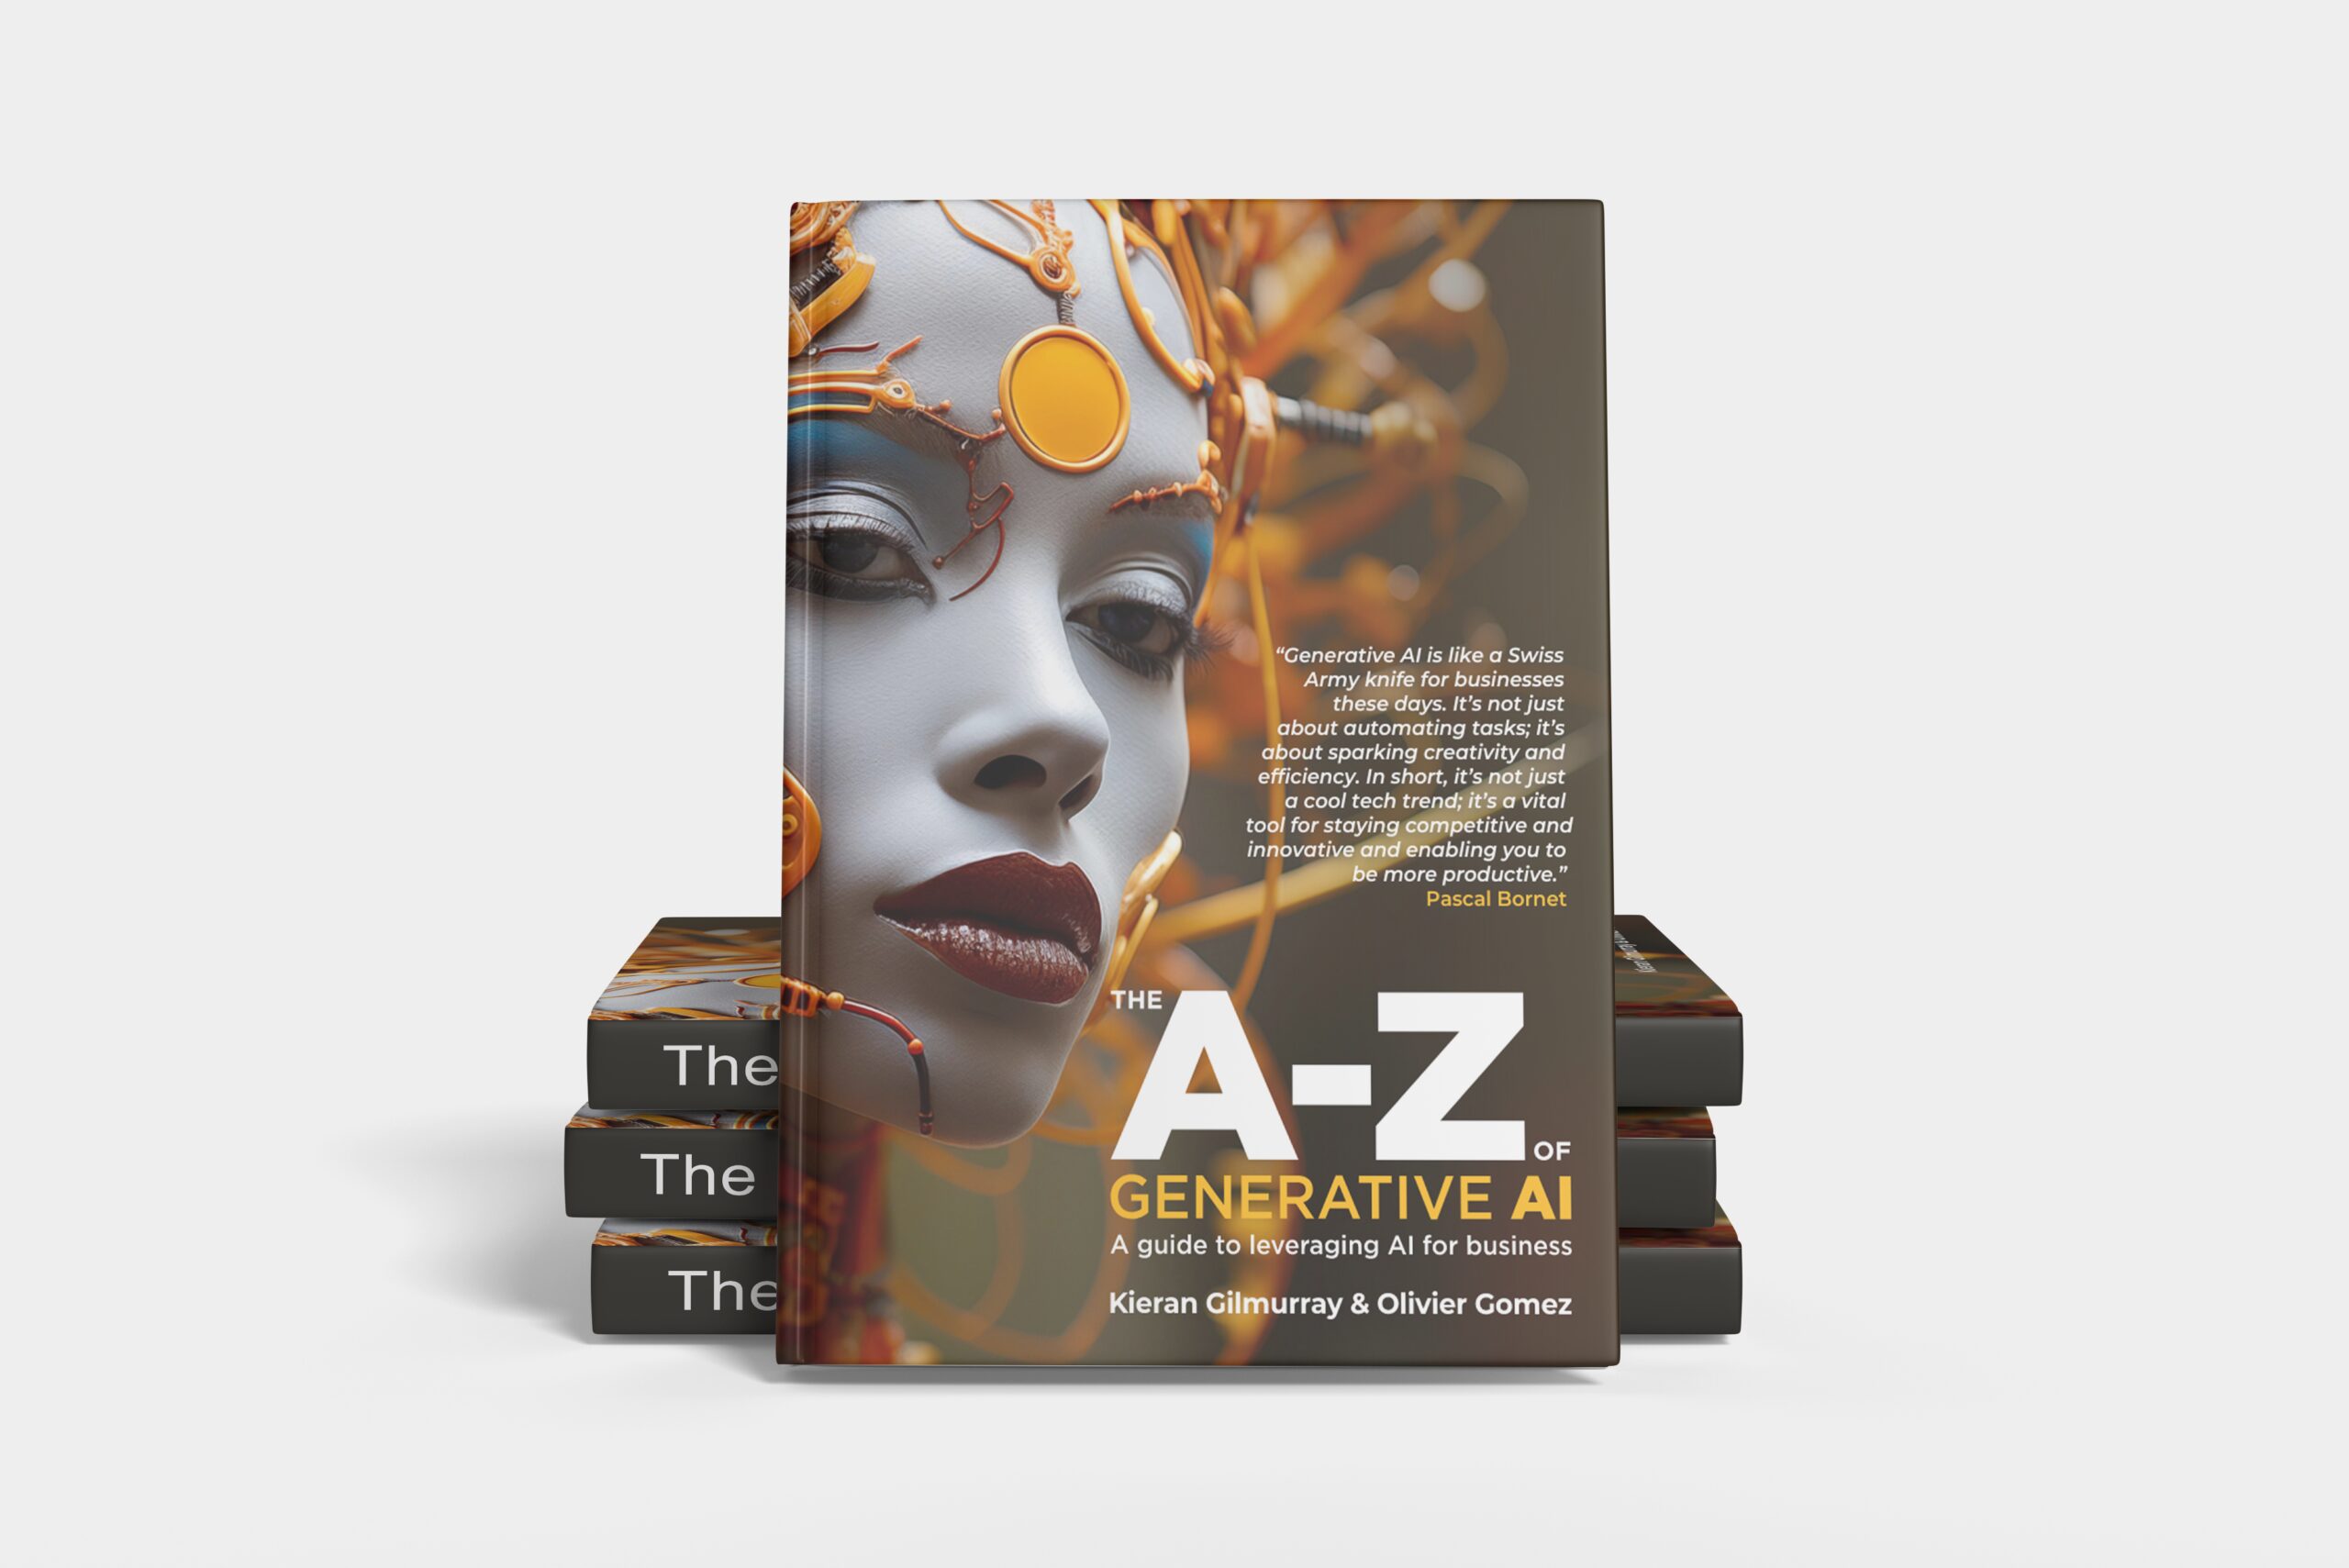 New book launched to help businesses benefit from Generative AI